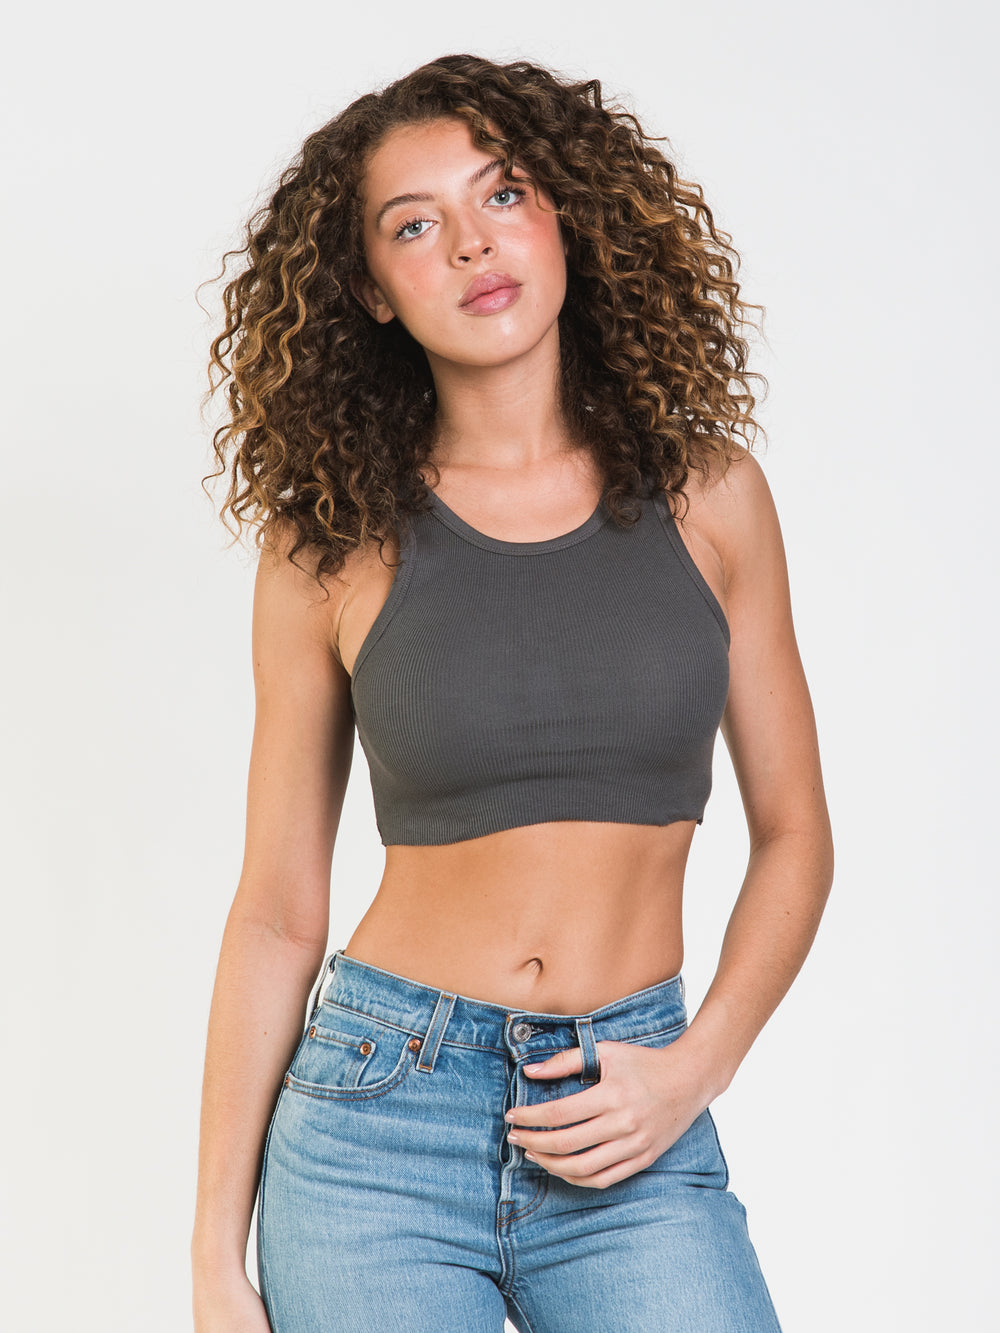 HARLOW HIGH NECK Tank Top - CLEARANCE